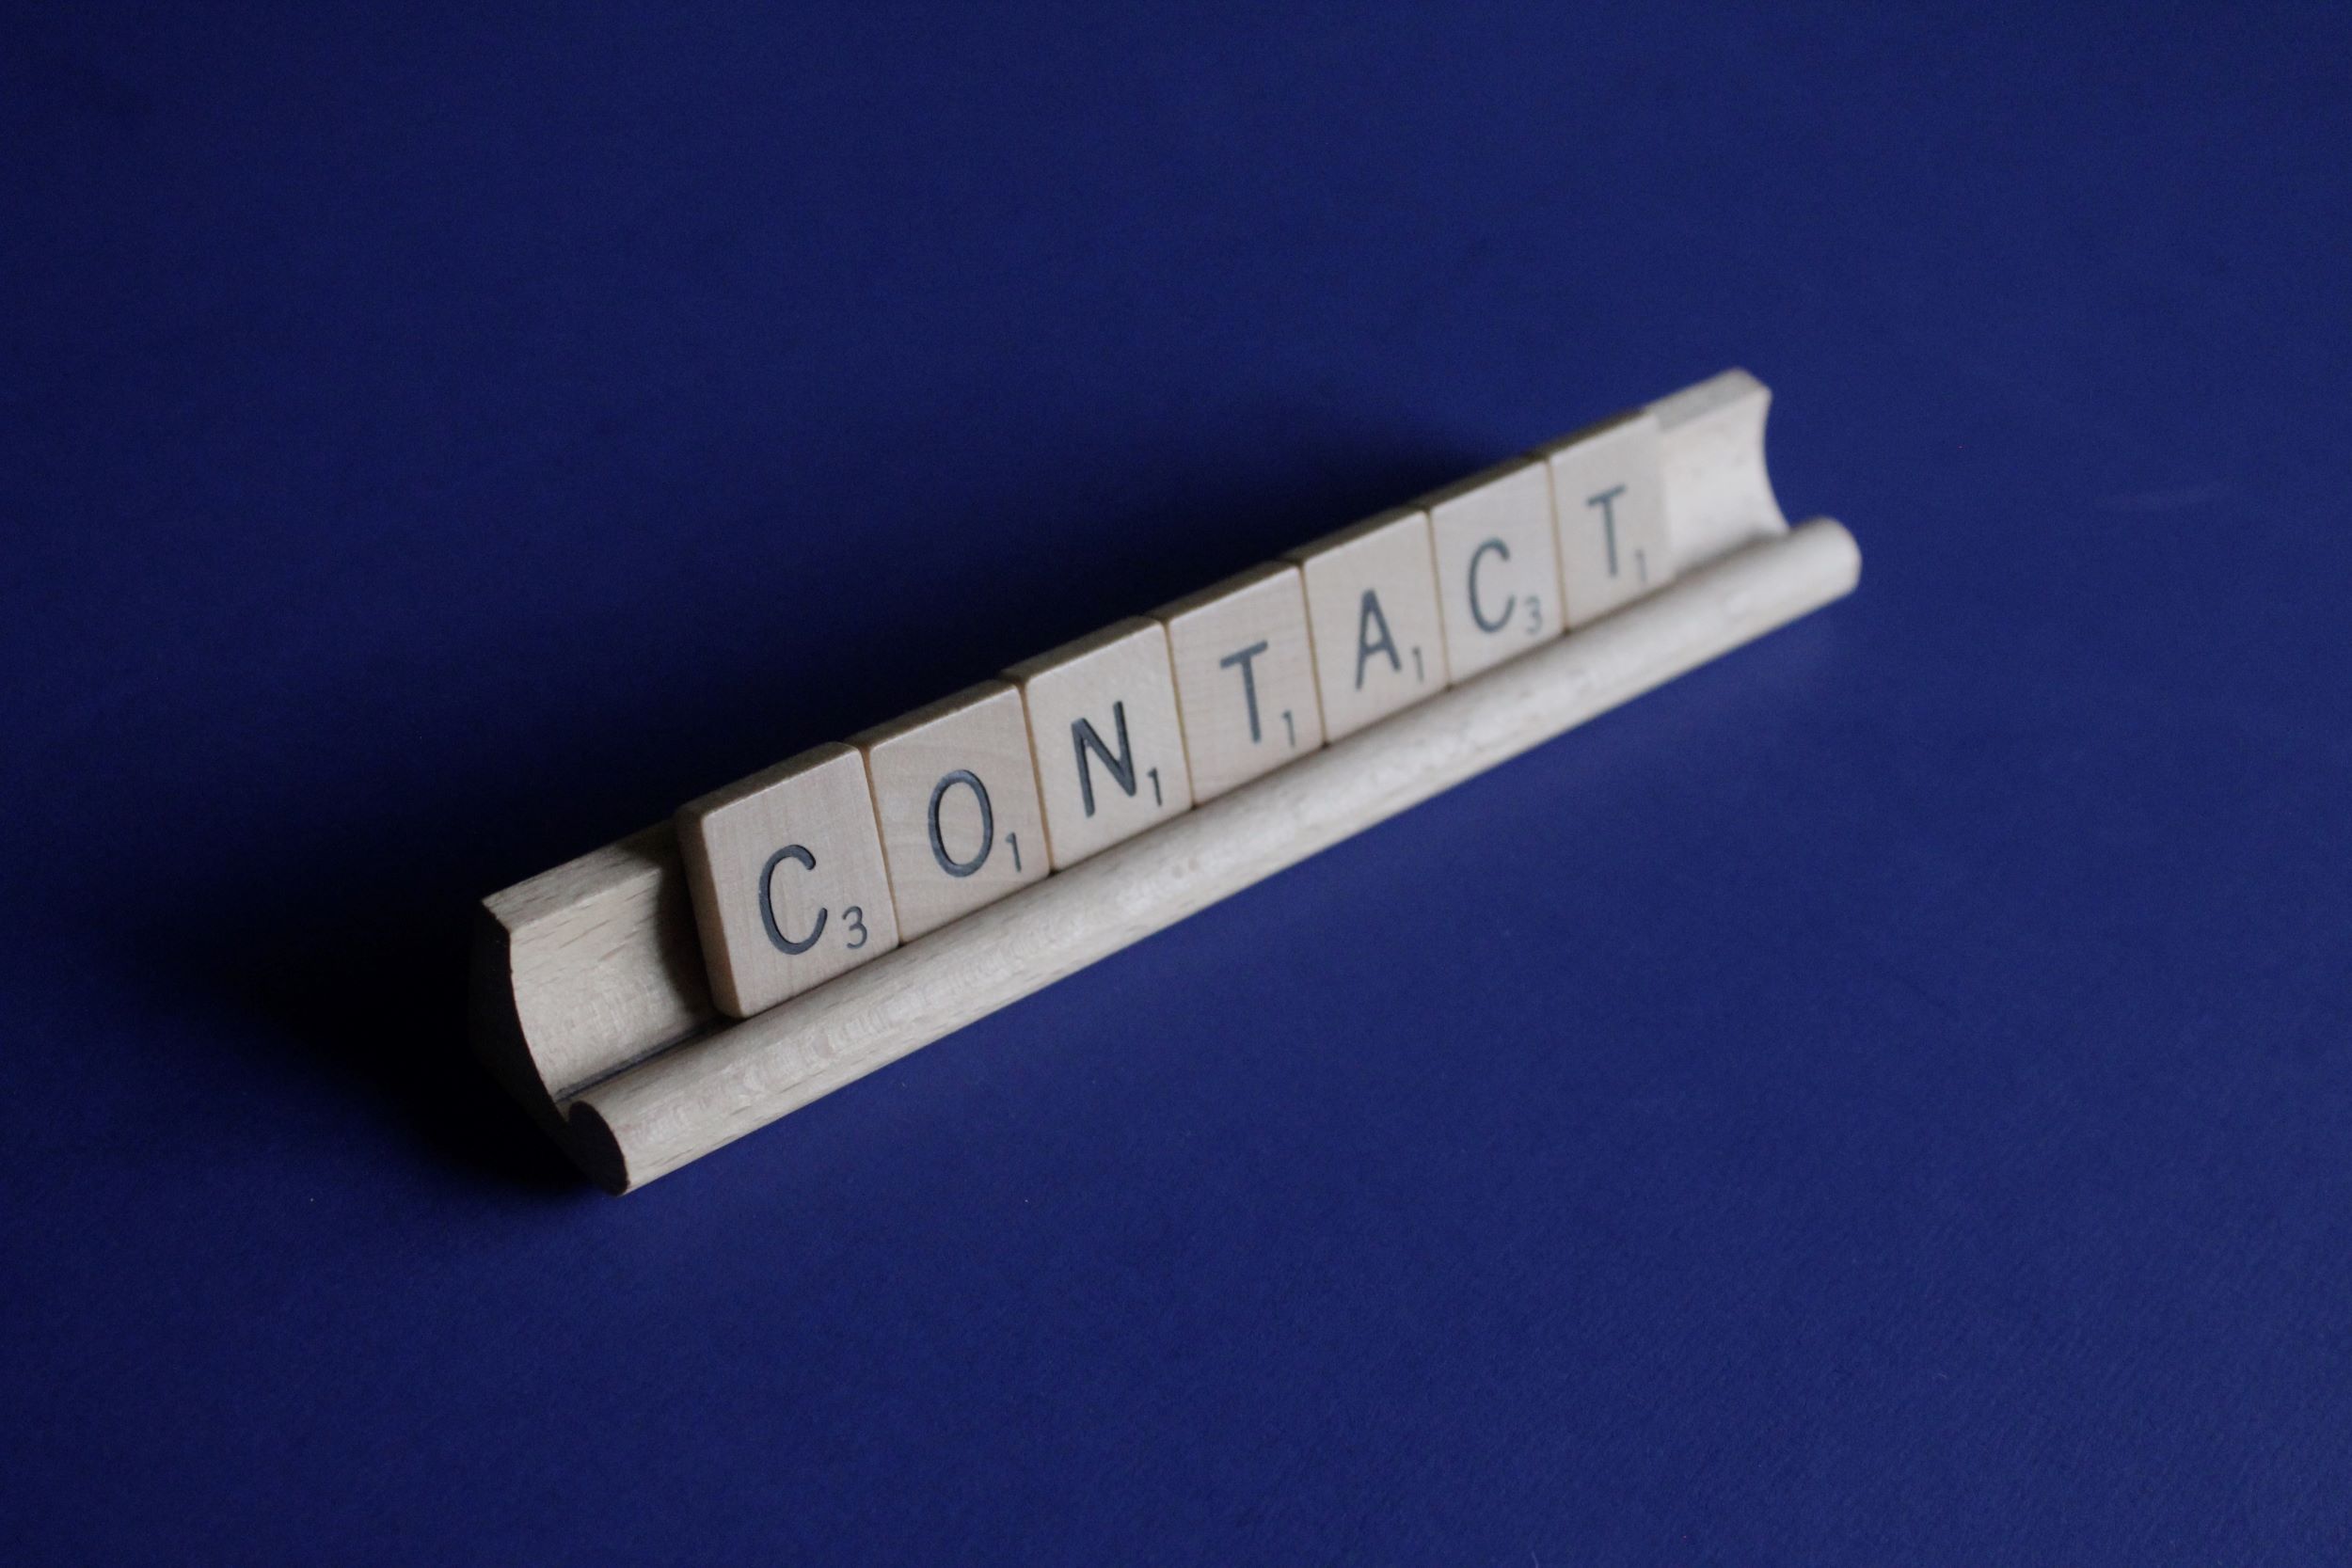 scrabble tiles that spell "contact"